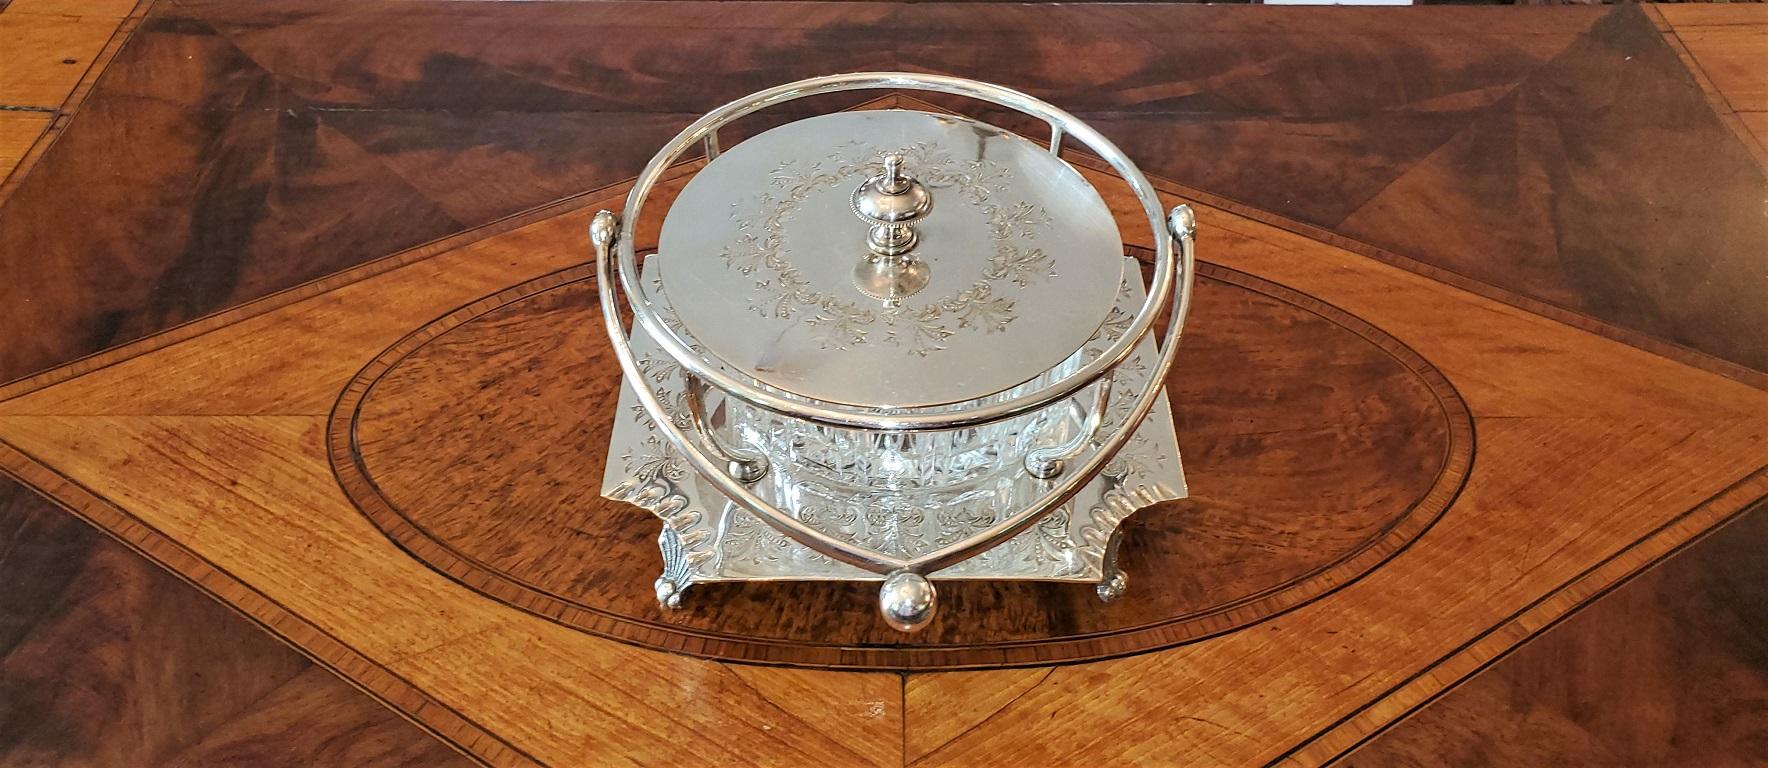 19th Century British Old Sheffield Plate Bon Dish with Crystal Bowl 5